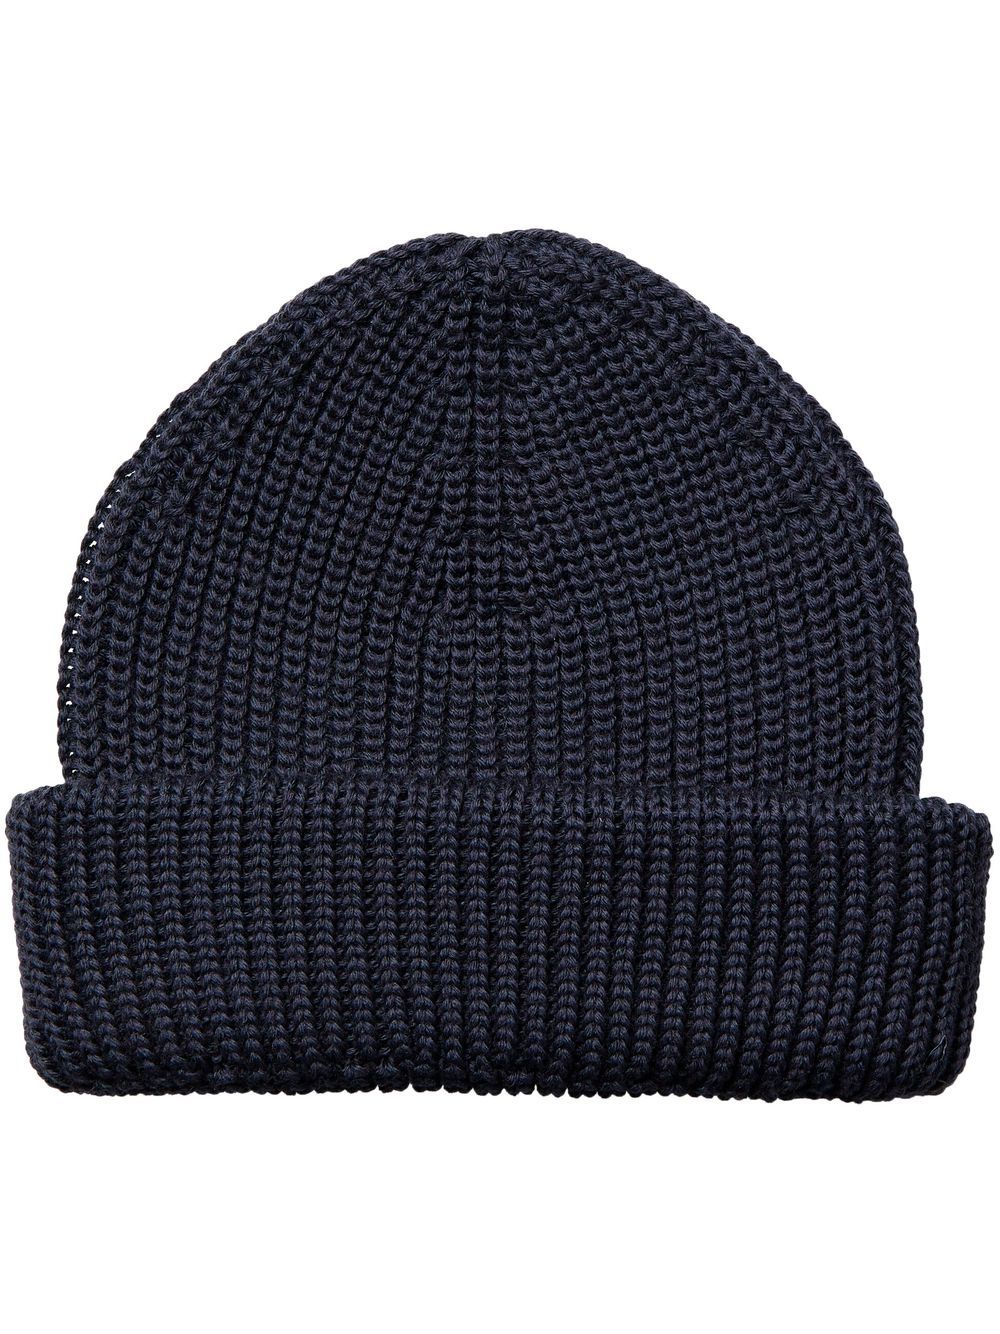 Applied Art Forms ribbed wool beanie - Grey von Applied Art Forms